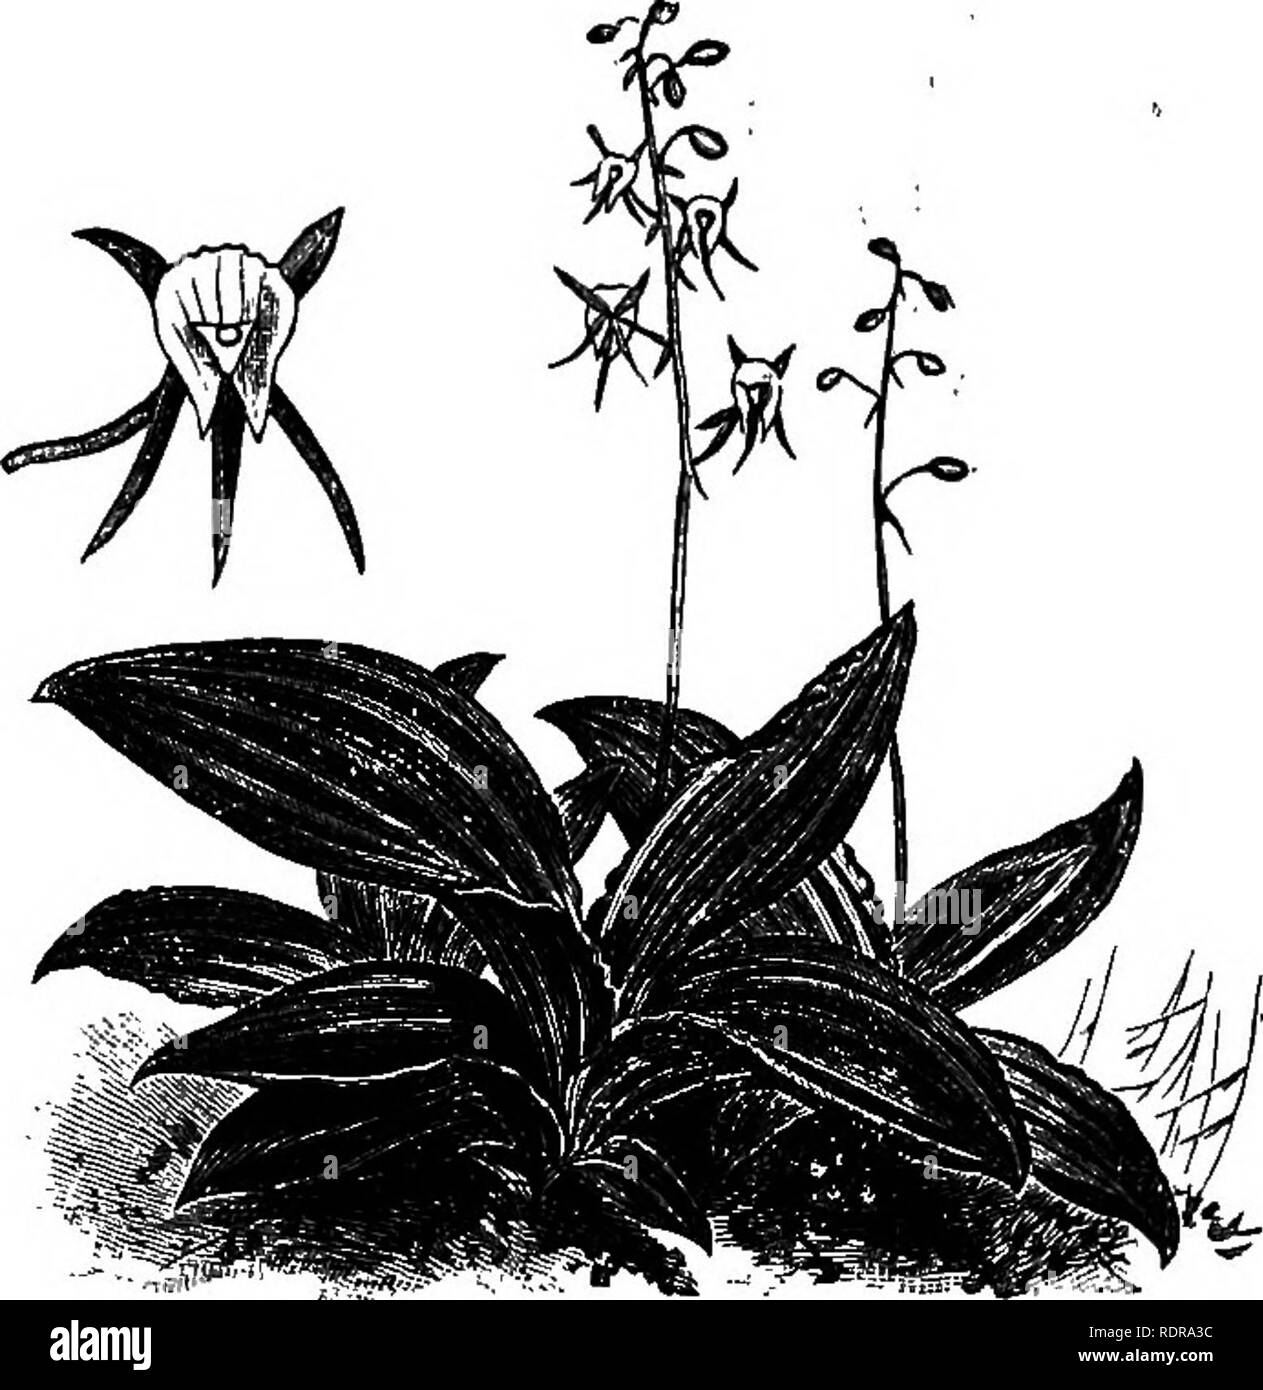 . The orchid-grower's manual, containing descriptions of the best species and varieties of orchidaceous plants in cultivation ... Orchids. MICROSTYLIS. 515 M. BELLA, Bchh.f.—A handsome plant with cylindrical pseudobulbs and large oblong leaves. The somewhat small flowers are produced in great numbers on each raceme; sepals and petals are pale purple-green at the extremities; the purple lip is furnished with very long auricles.—Malay Archipelago. FjQ.—Z'Zllust. Iloii., xxxiii. t. 181. M. CALOPHYLLA, Bclib. f.—A distinct and handsome species, with orna- mental foliage. The leaves are oval lanceo Stock Photo